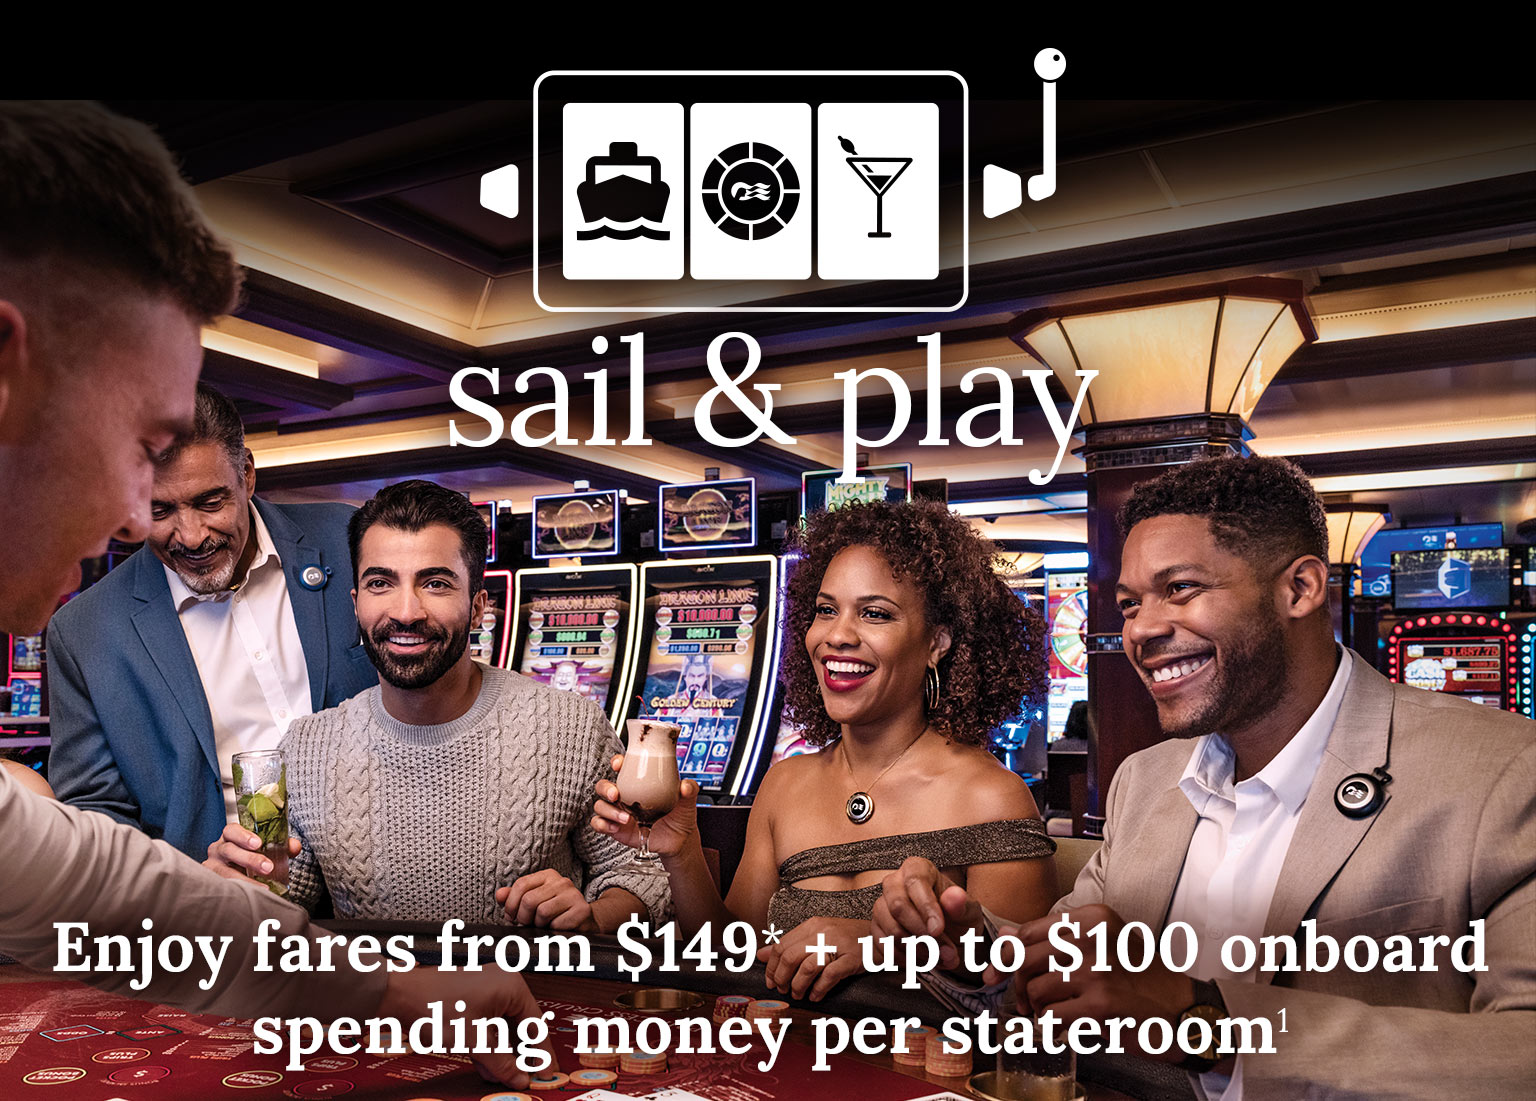 enjoy fares from $149 + up to $100 onboard spending money per stateroom. Click here to book. 